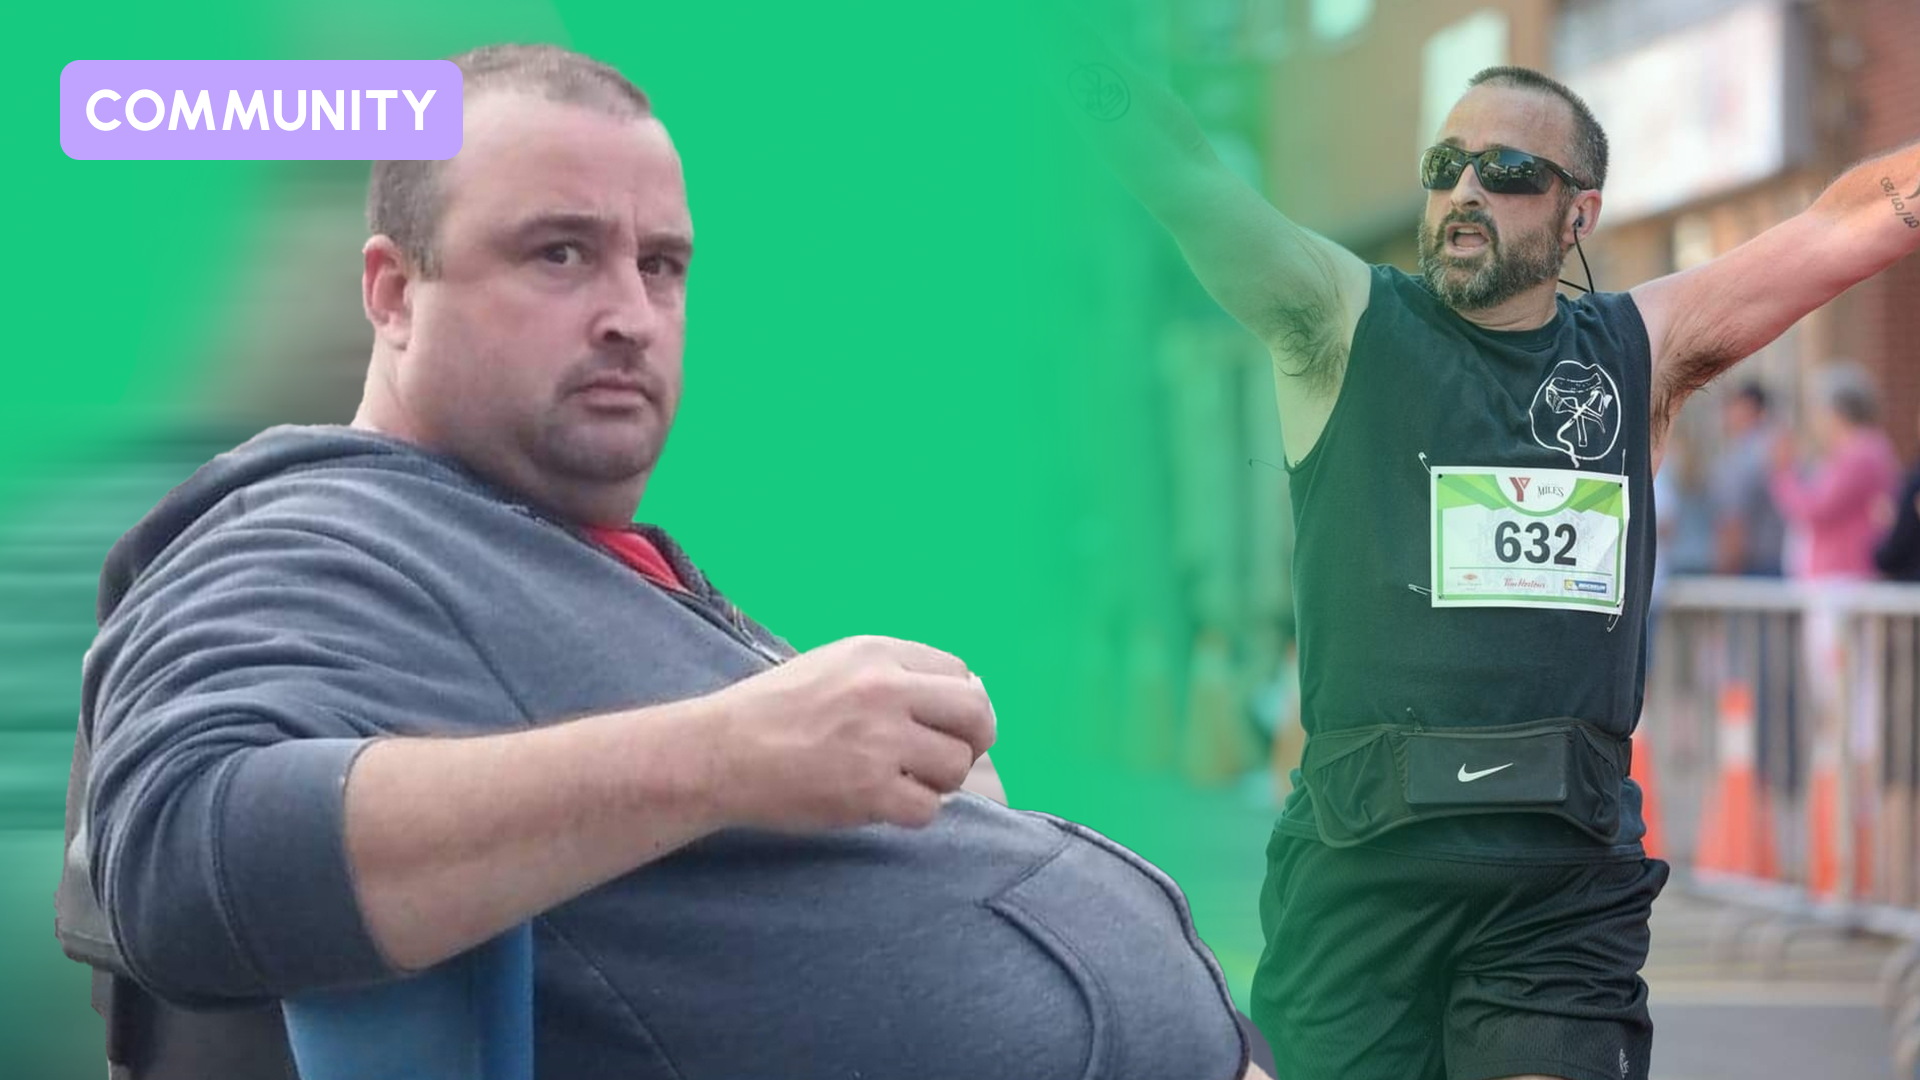 Fastic user Don Gunton loses over 100 pounds to save his life